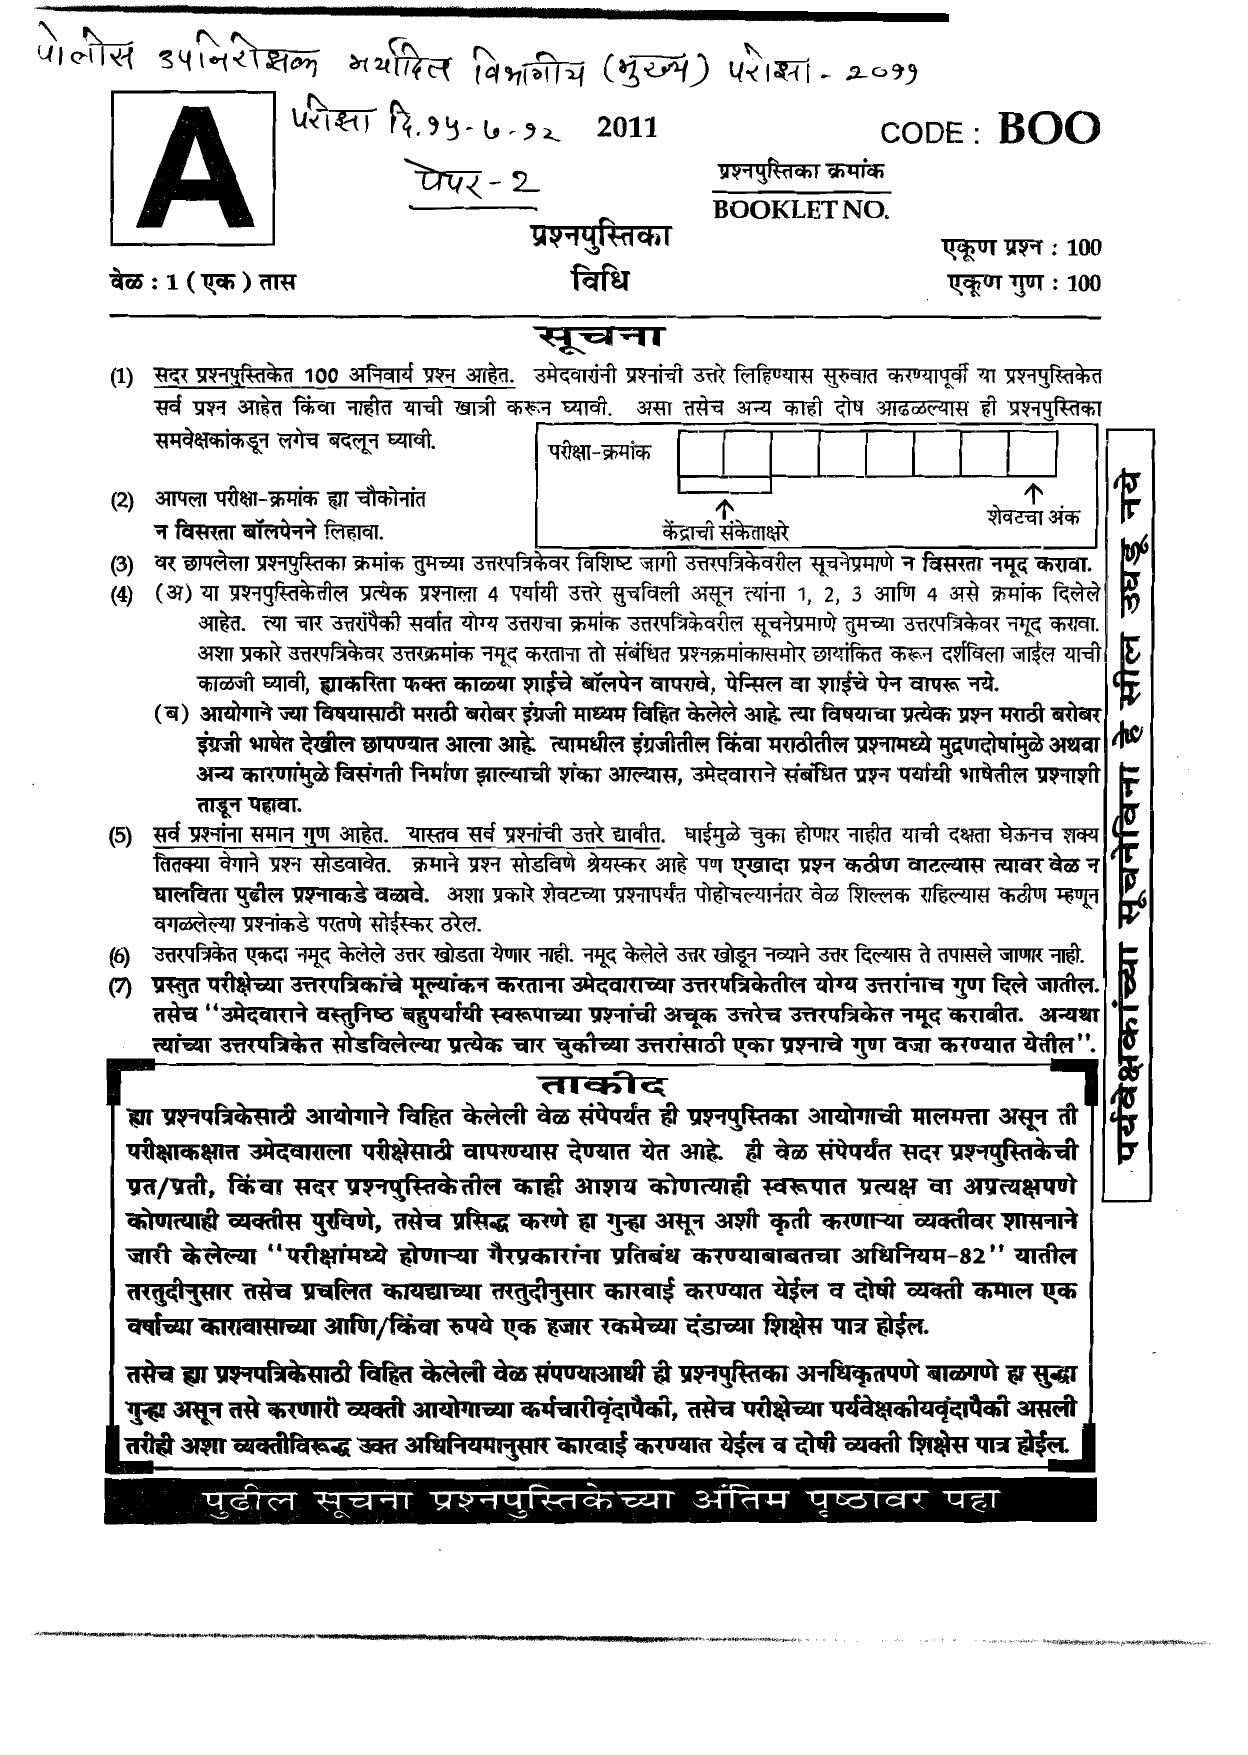 Assam Police LDA, UDA & Other Posts General Knowledge Sample papers - Page 1